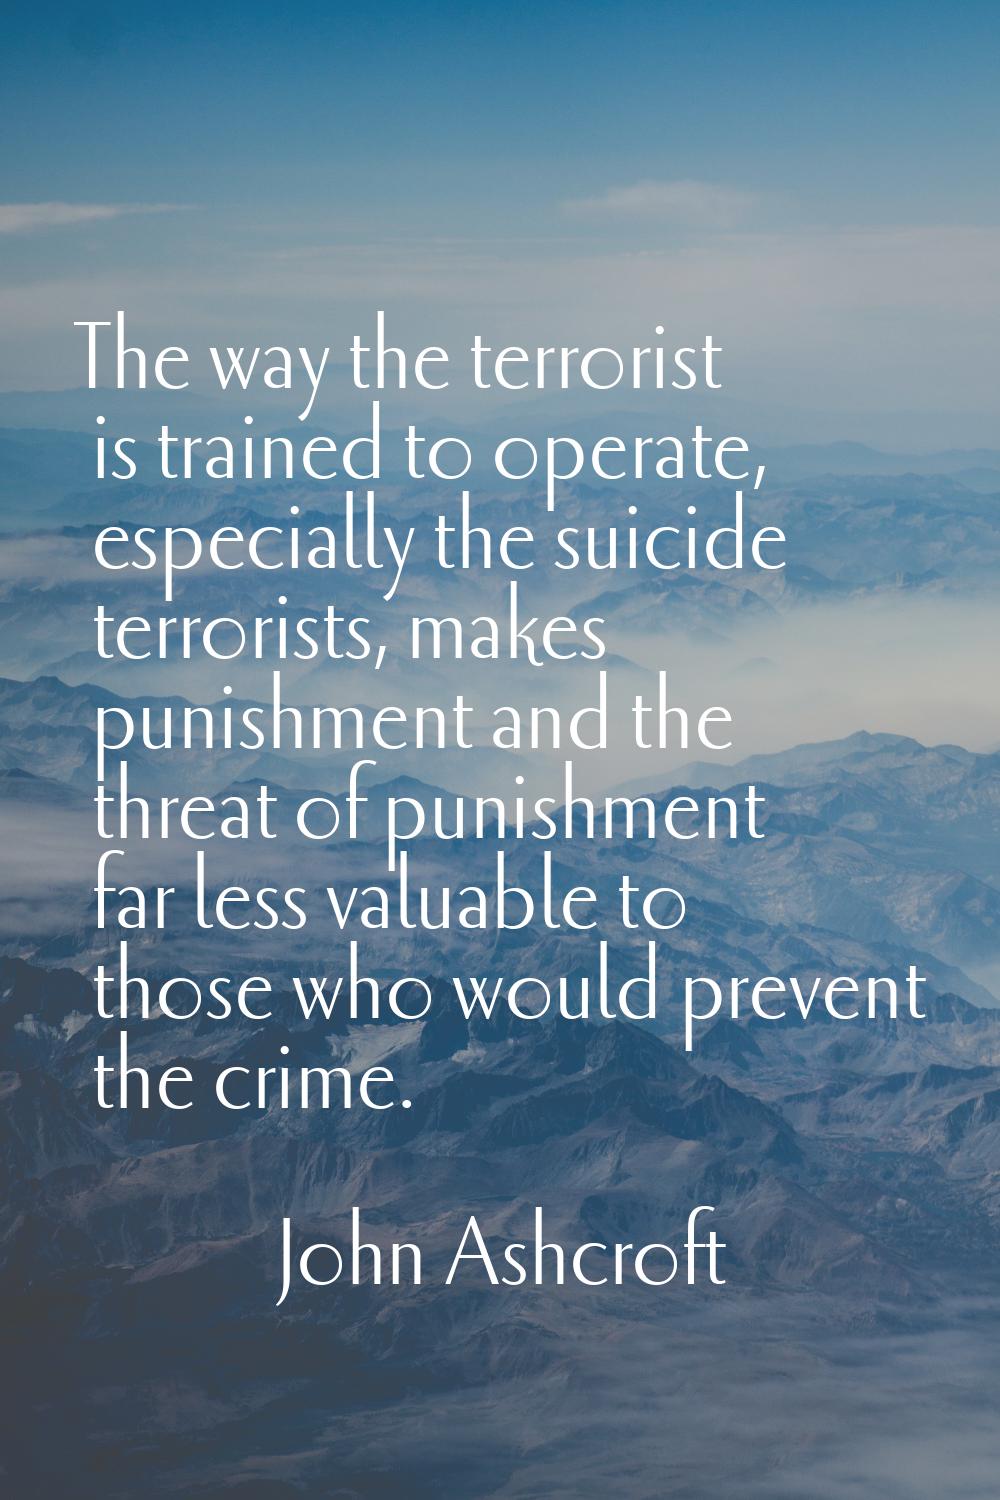 The way the terrorist is trained to operate, especially the suicide terrorists, makes punishment an